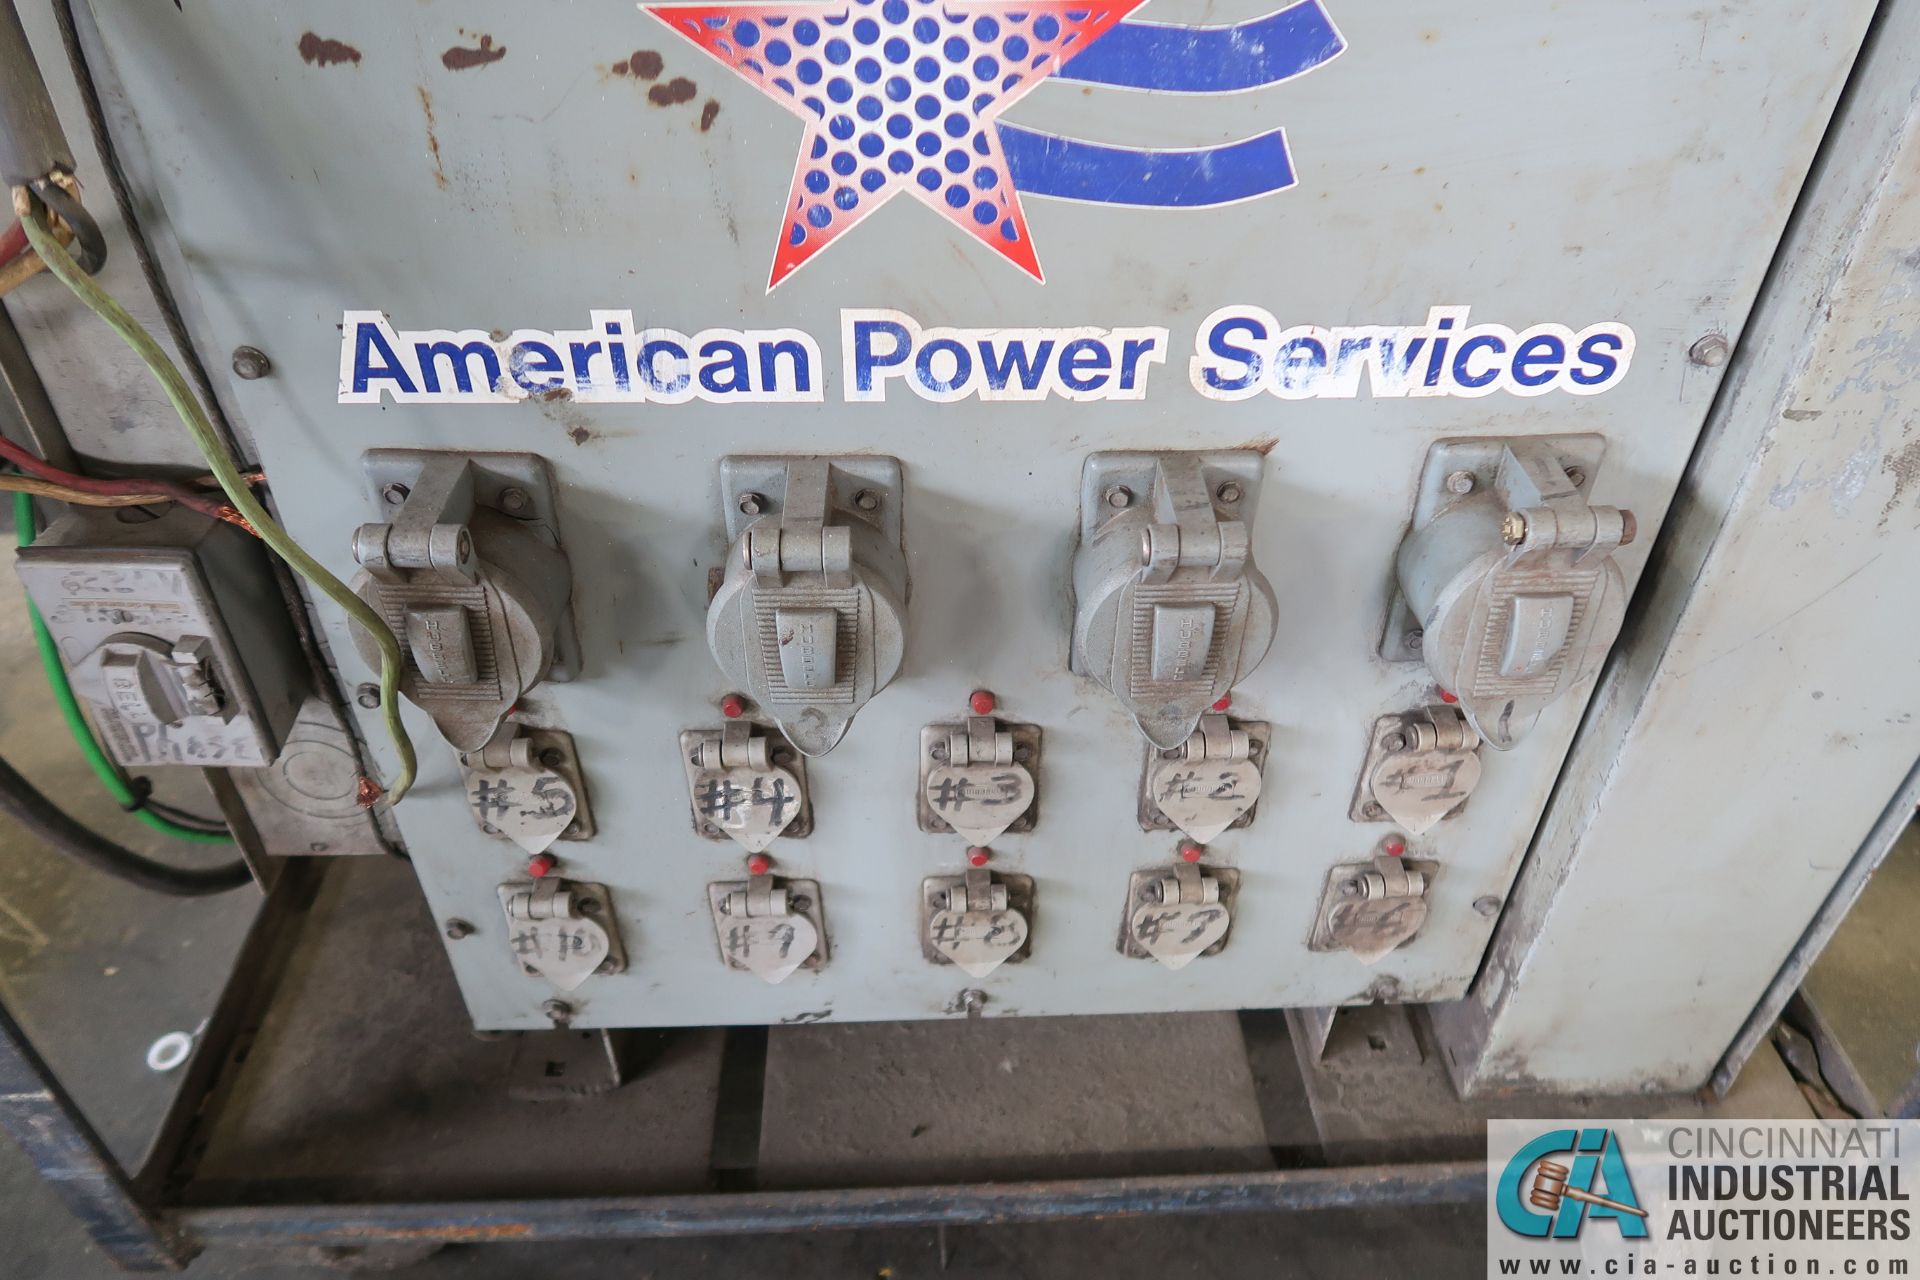 25 KVA AMERICAN POWER SERVICE PORTABLE POWER STATION W/ 480-VOLTS, 3-PHASE CONNECTIONS, 220-VOLTS - Image 8 of 8